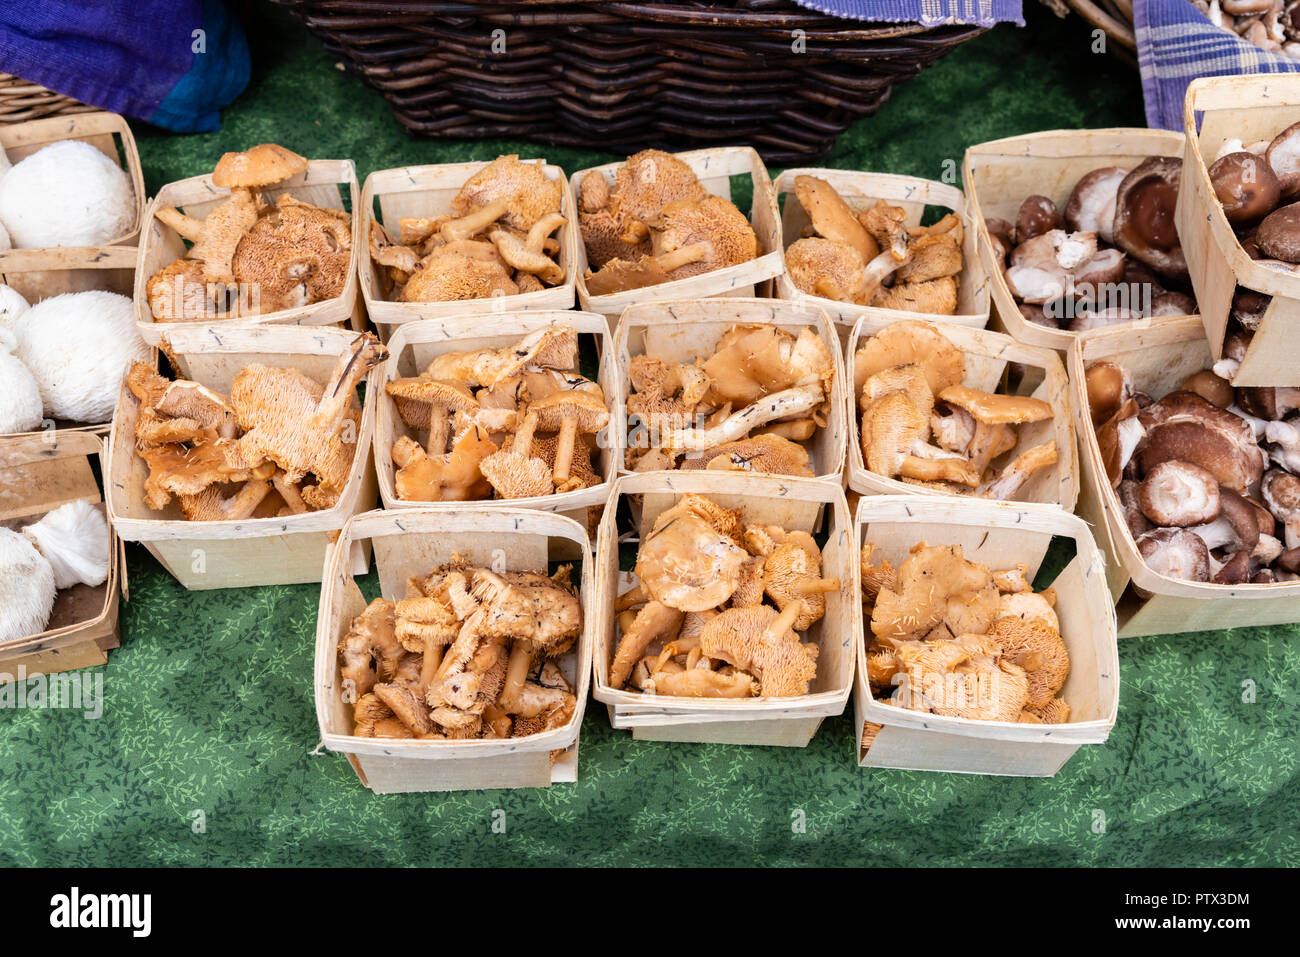 Baskets of wild harvested mushrooms on display at the farmers market Stock Photo